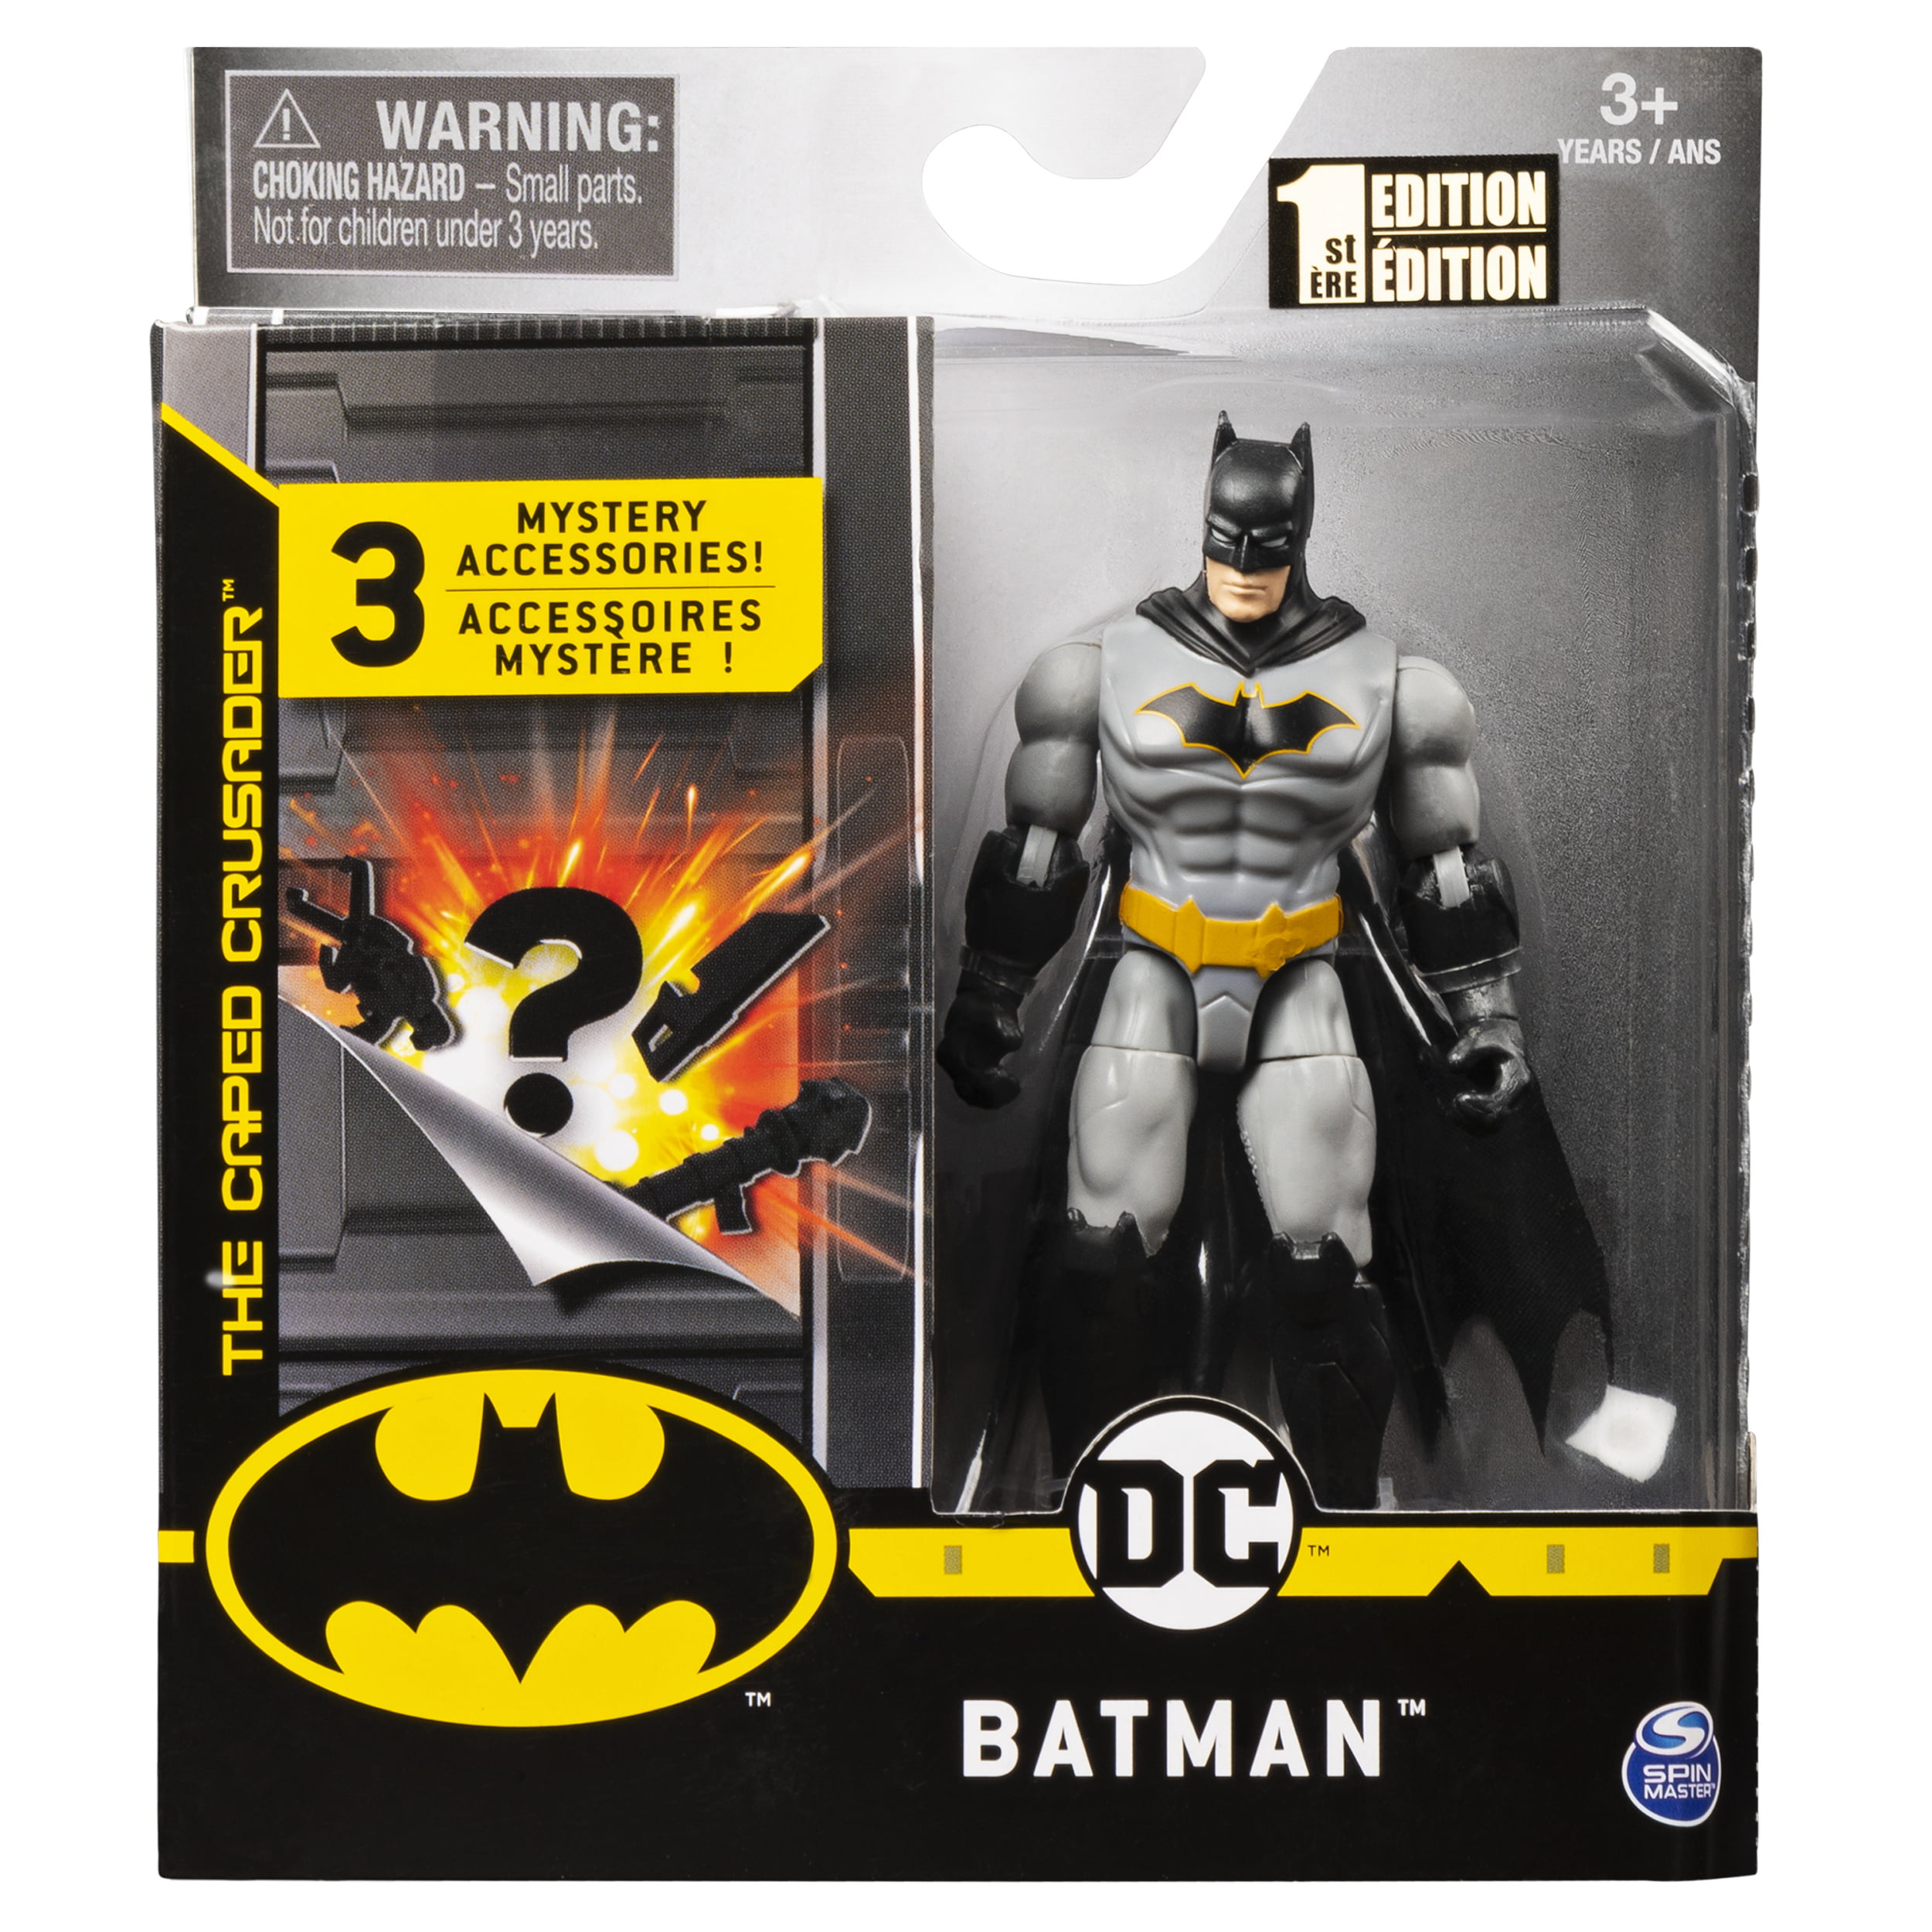 Batman 4-Inch Rebirth Batman Action Figure with 3 Mystery Accessories,  Mission 2 